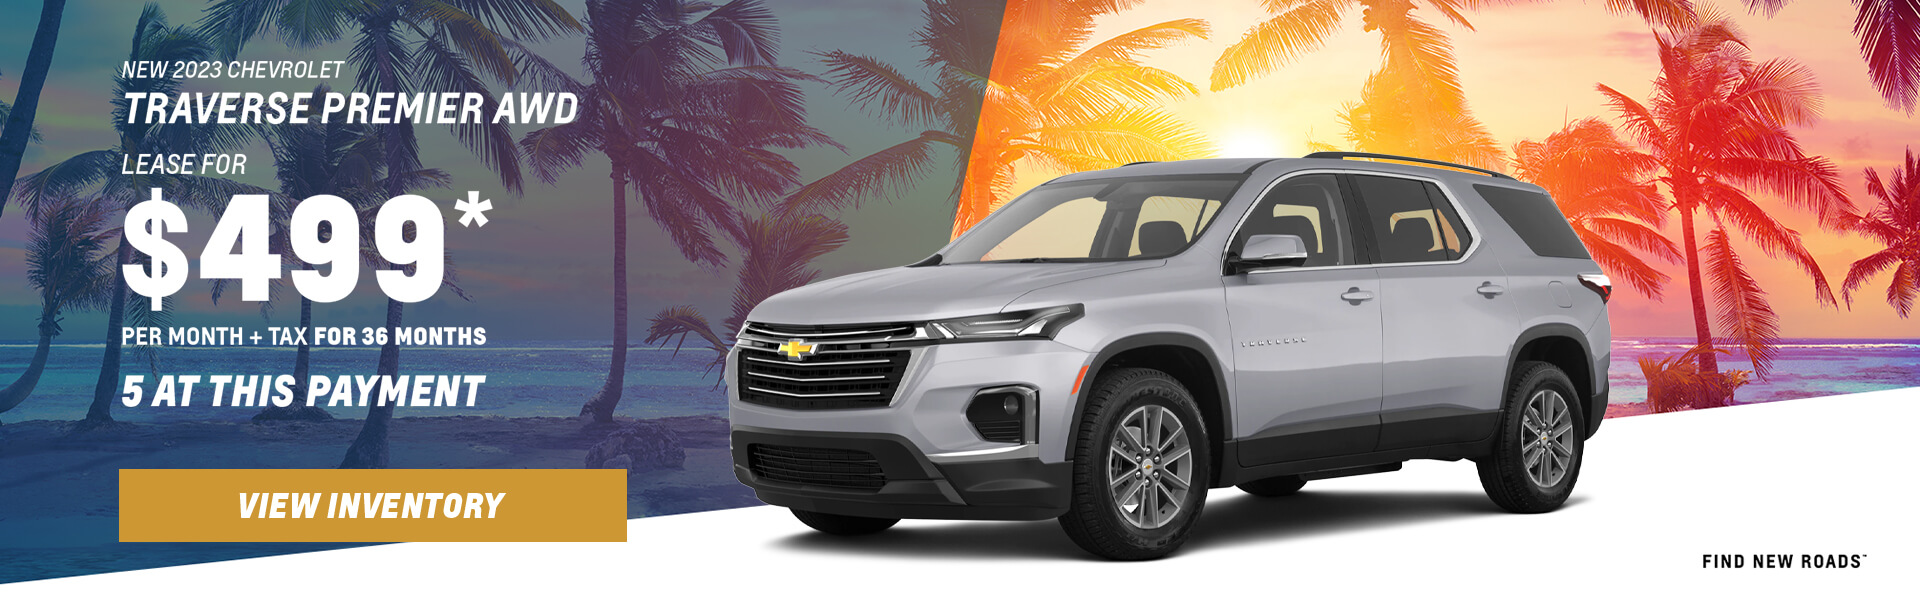 Find Your Perfect Ride at West Covina’s Premier Chevrolet Dealer